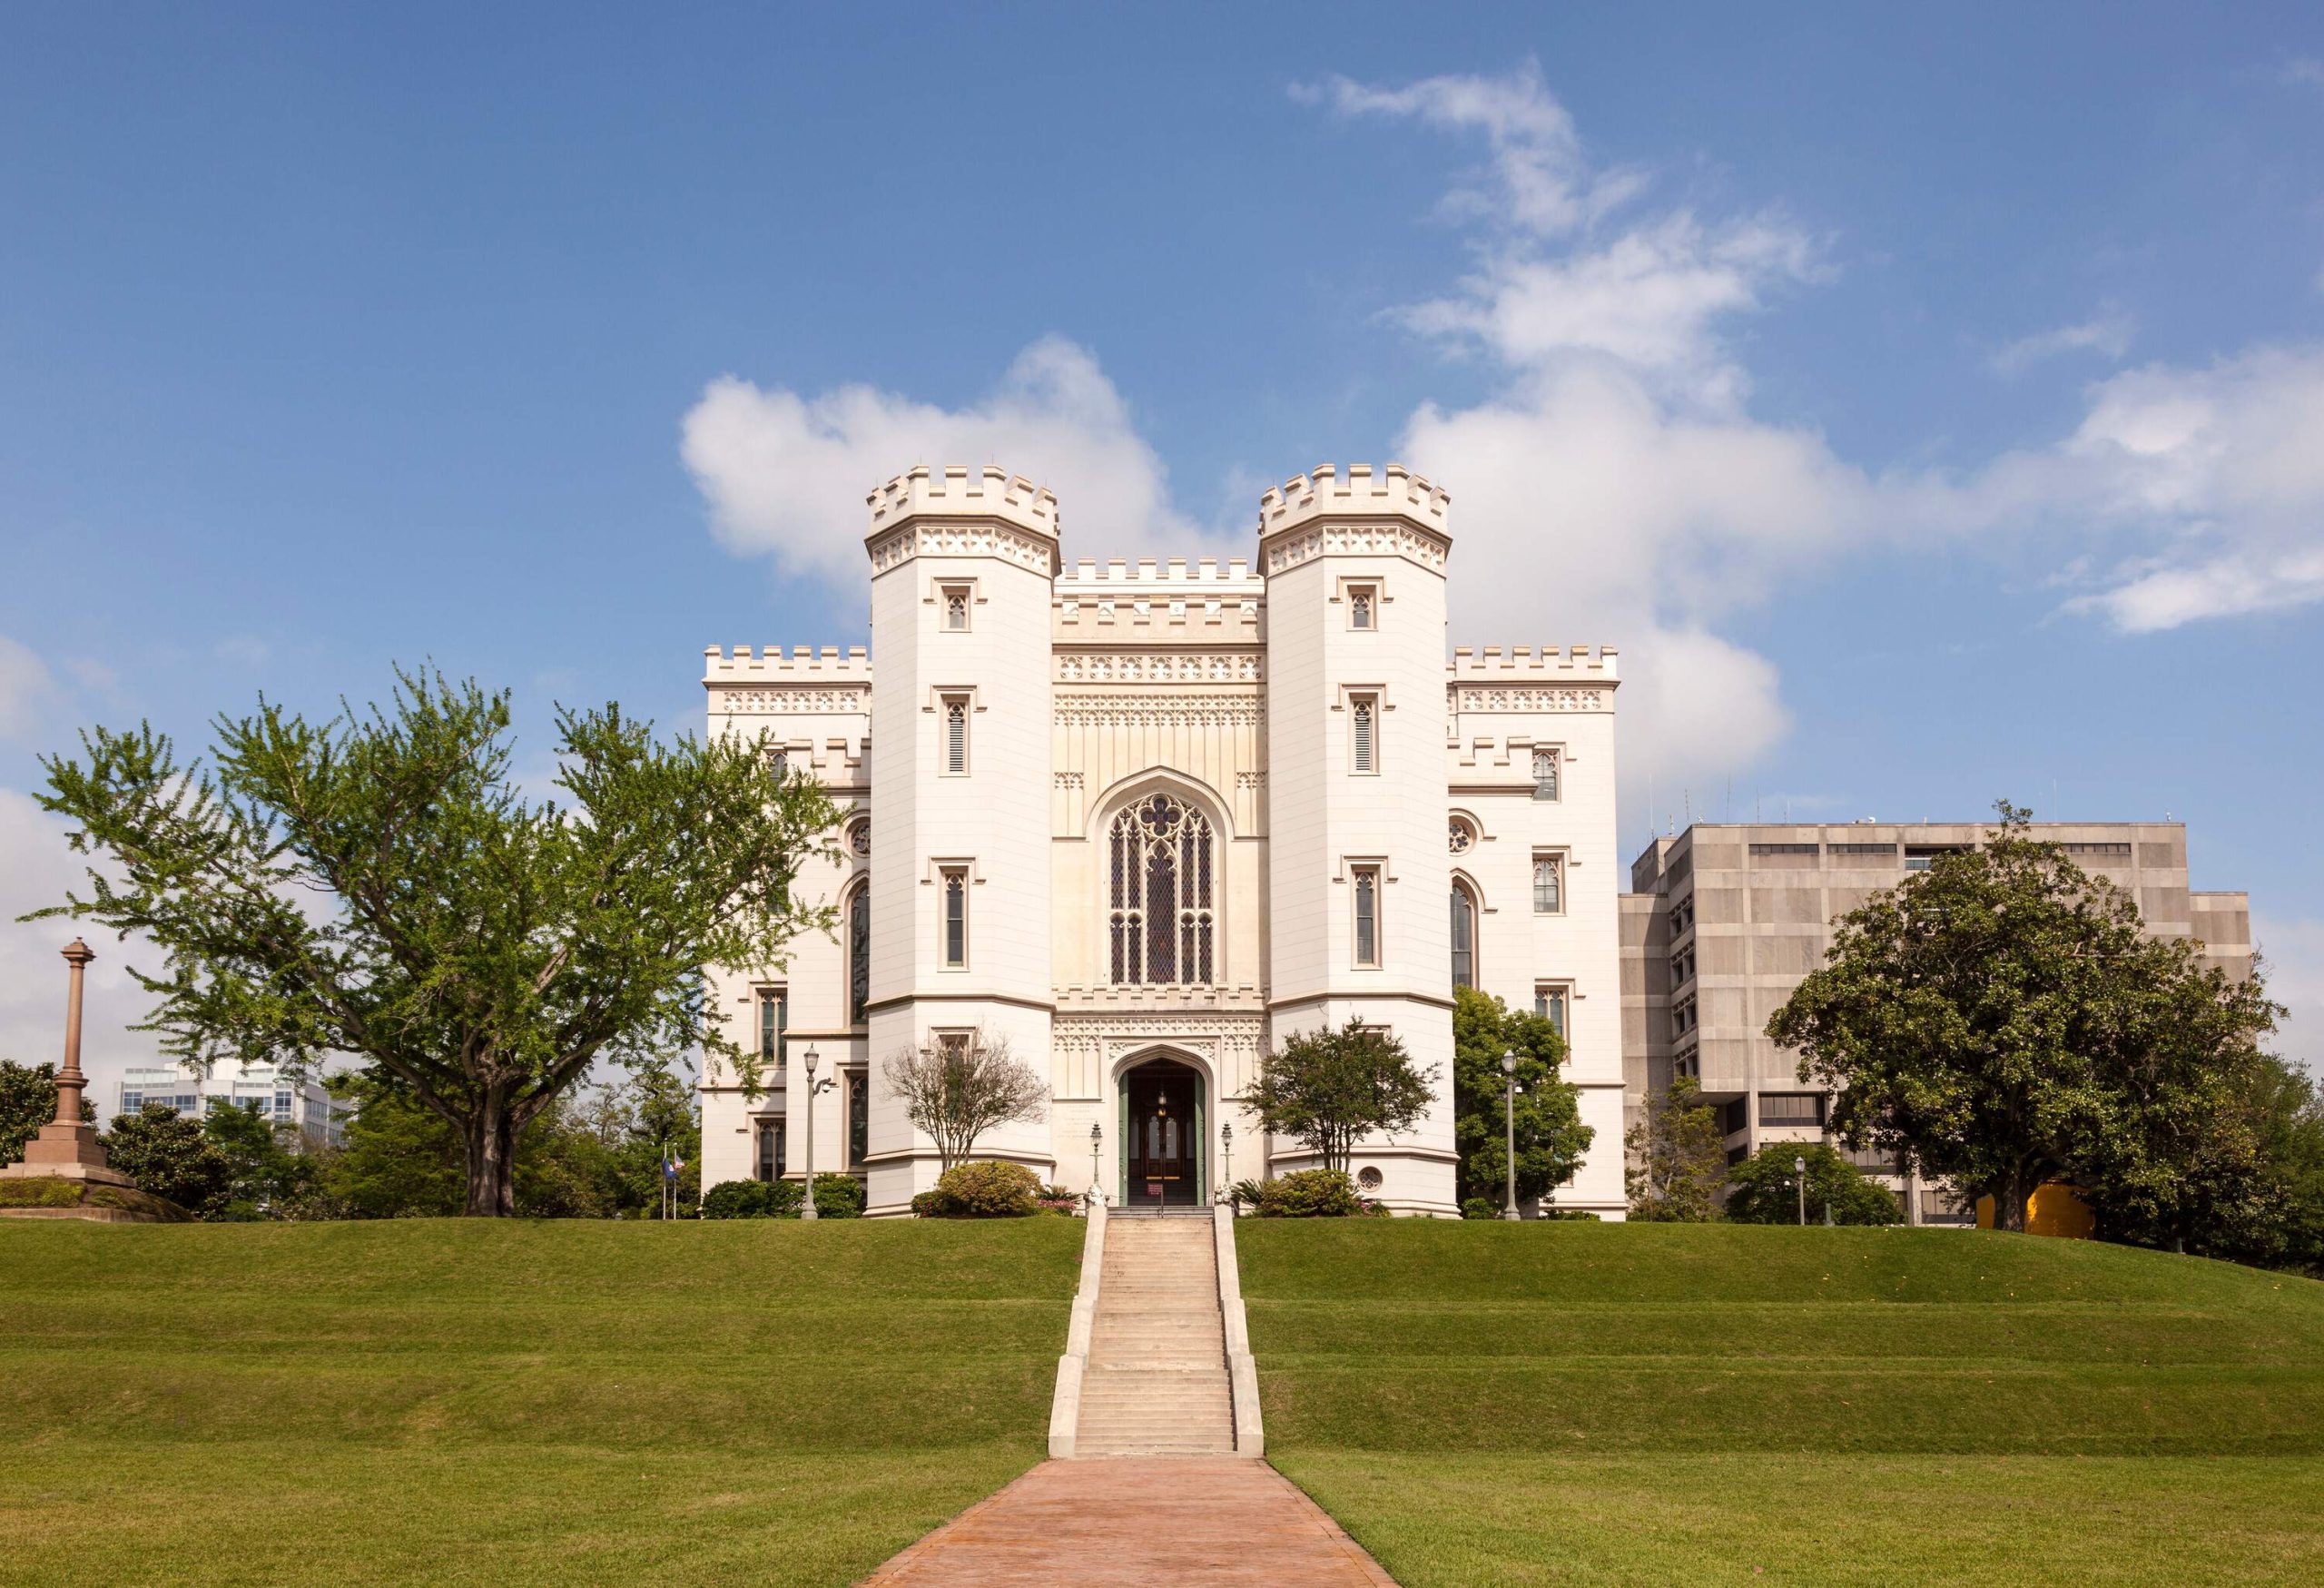 The Gothic Revival-style Old State Capitol building in Baton Rouge is a majestic and historic architectural gem.